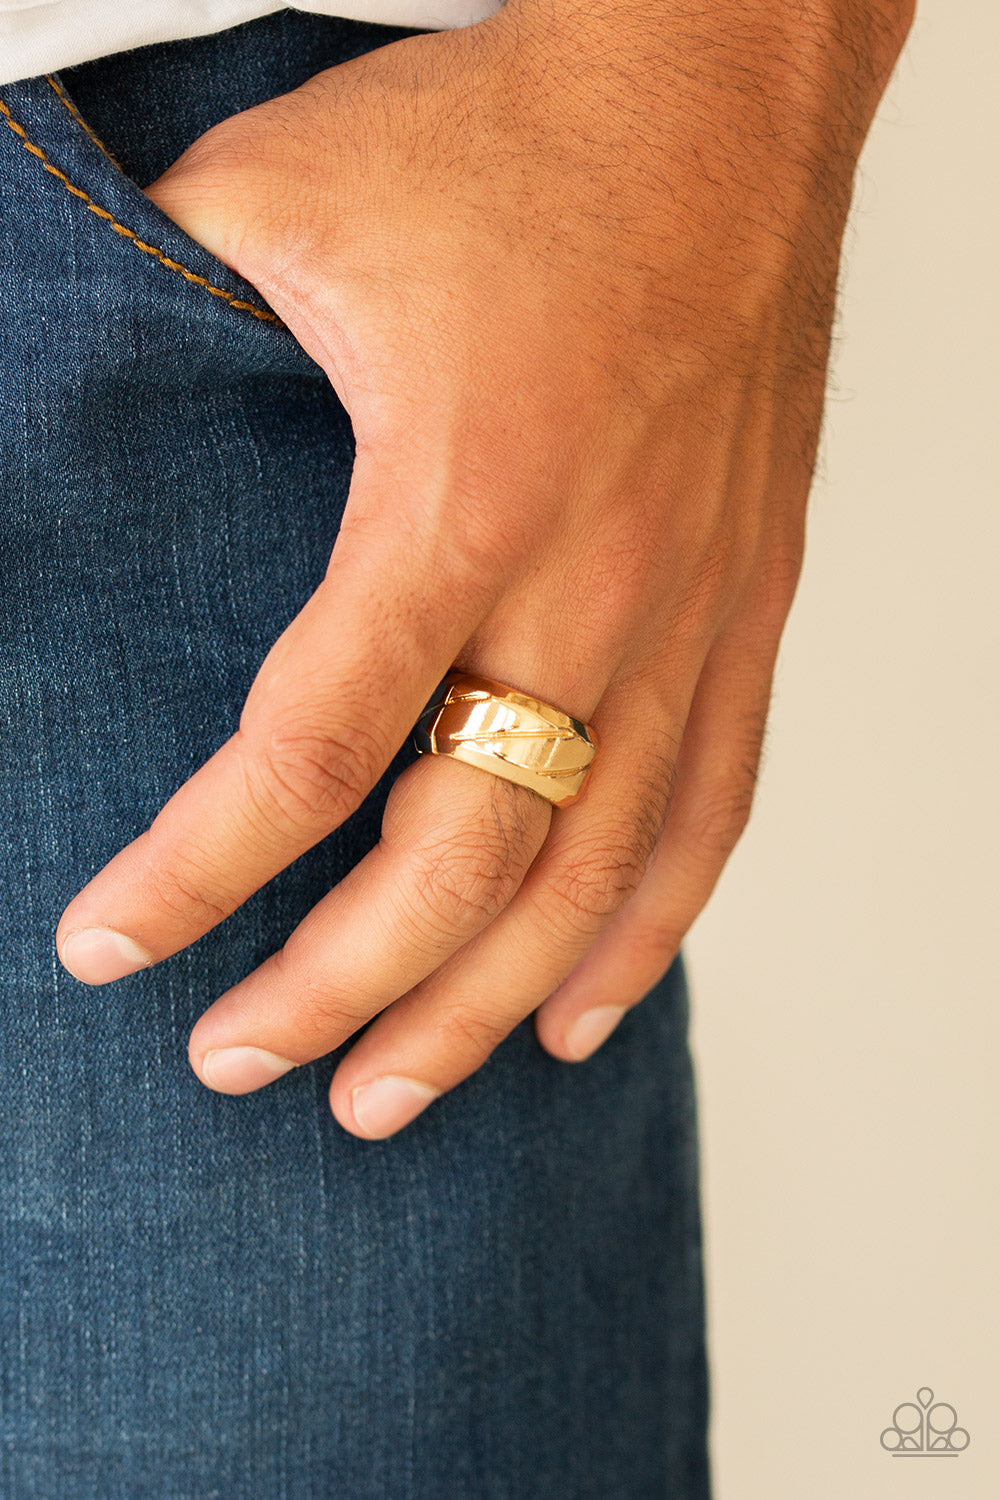 Sideswiped - Gold mens ring